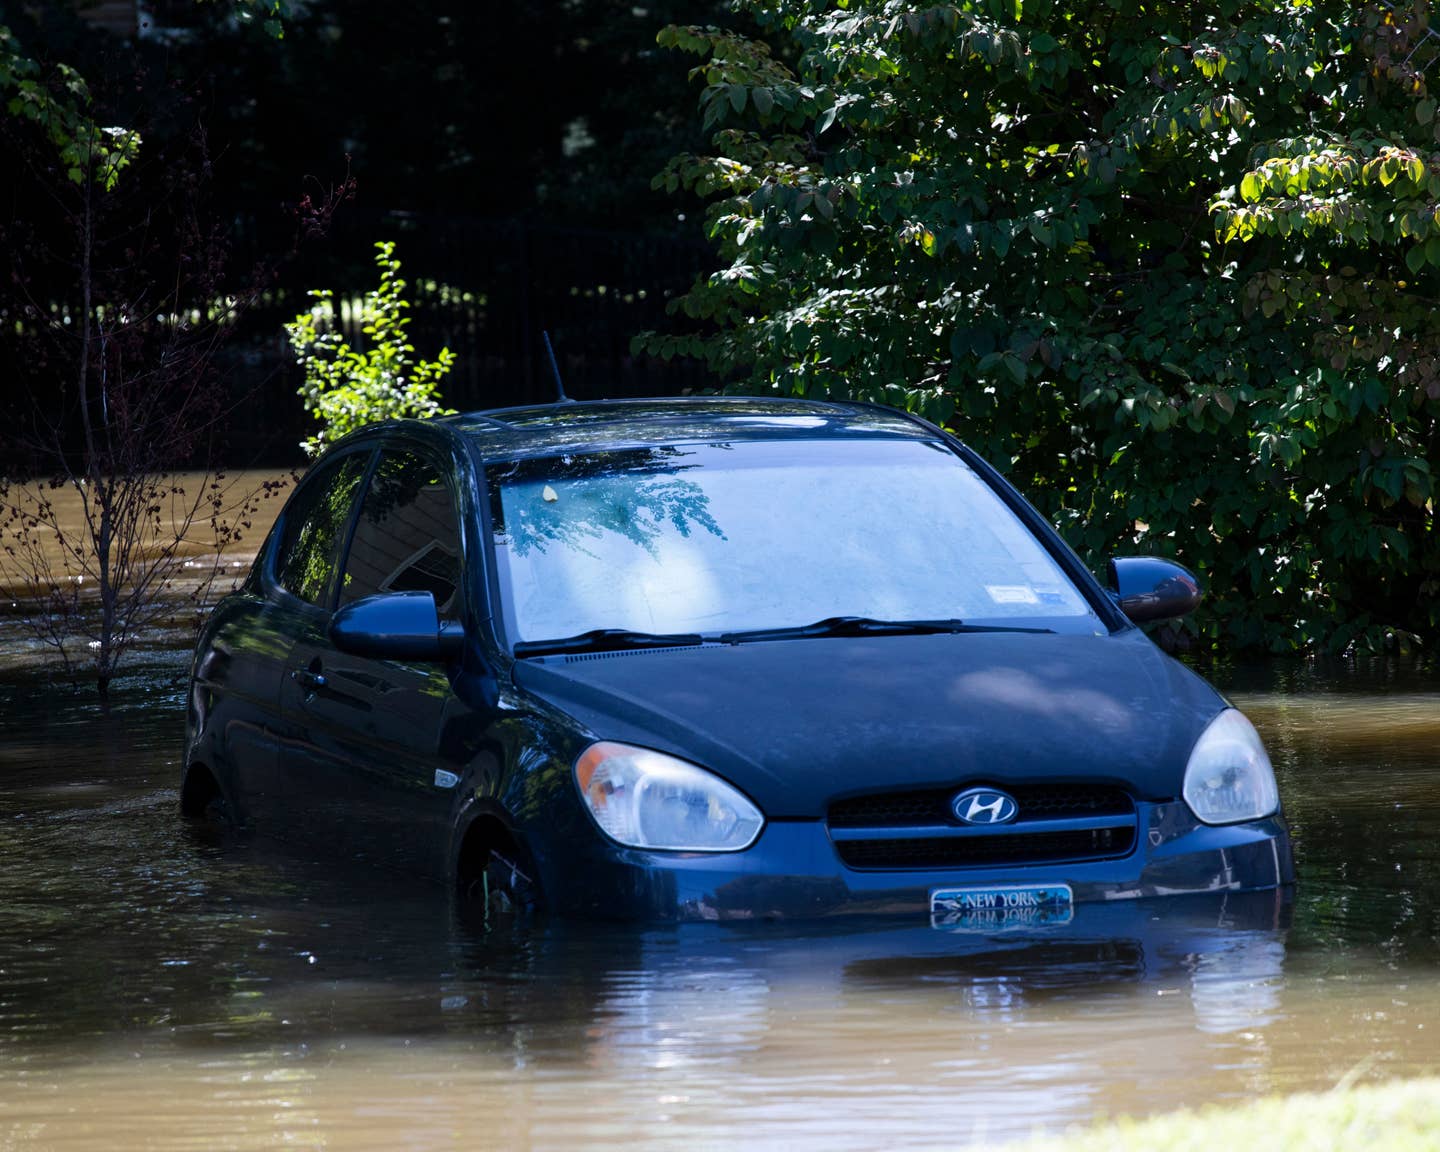 A Hyundai trapped in a flood in New York.